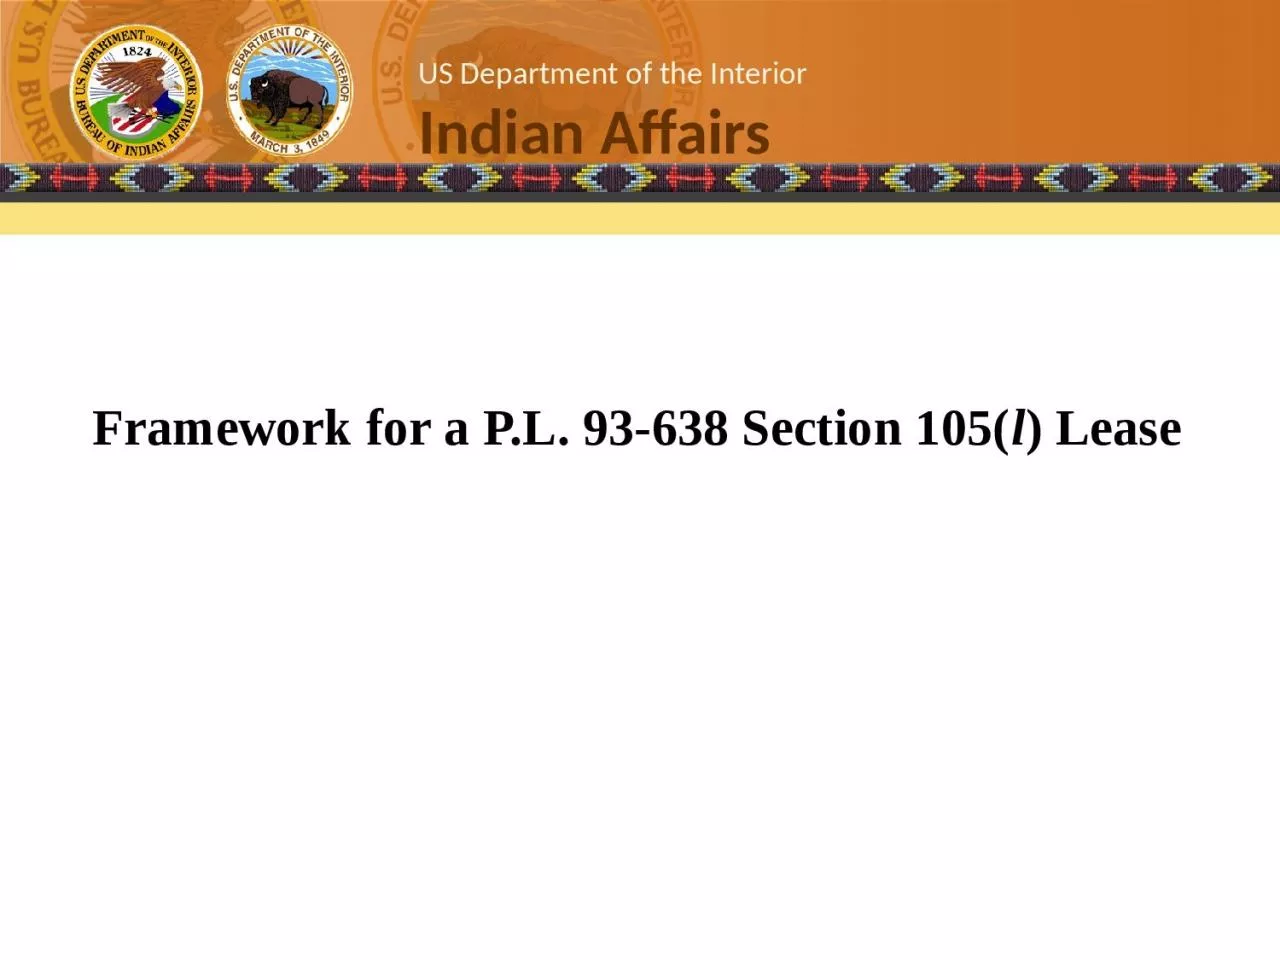 Framework for a P.L. 93-638 Section 105(